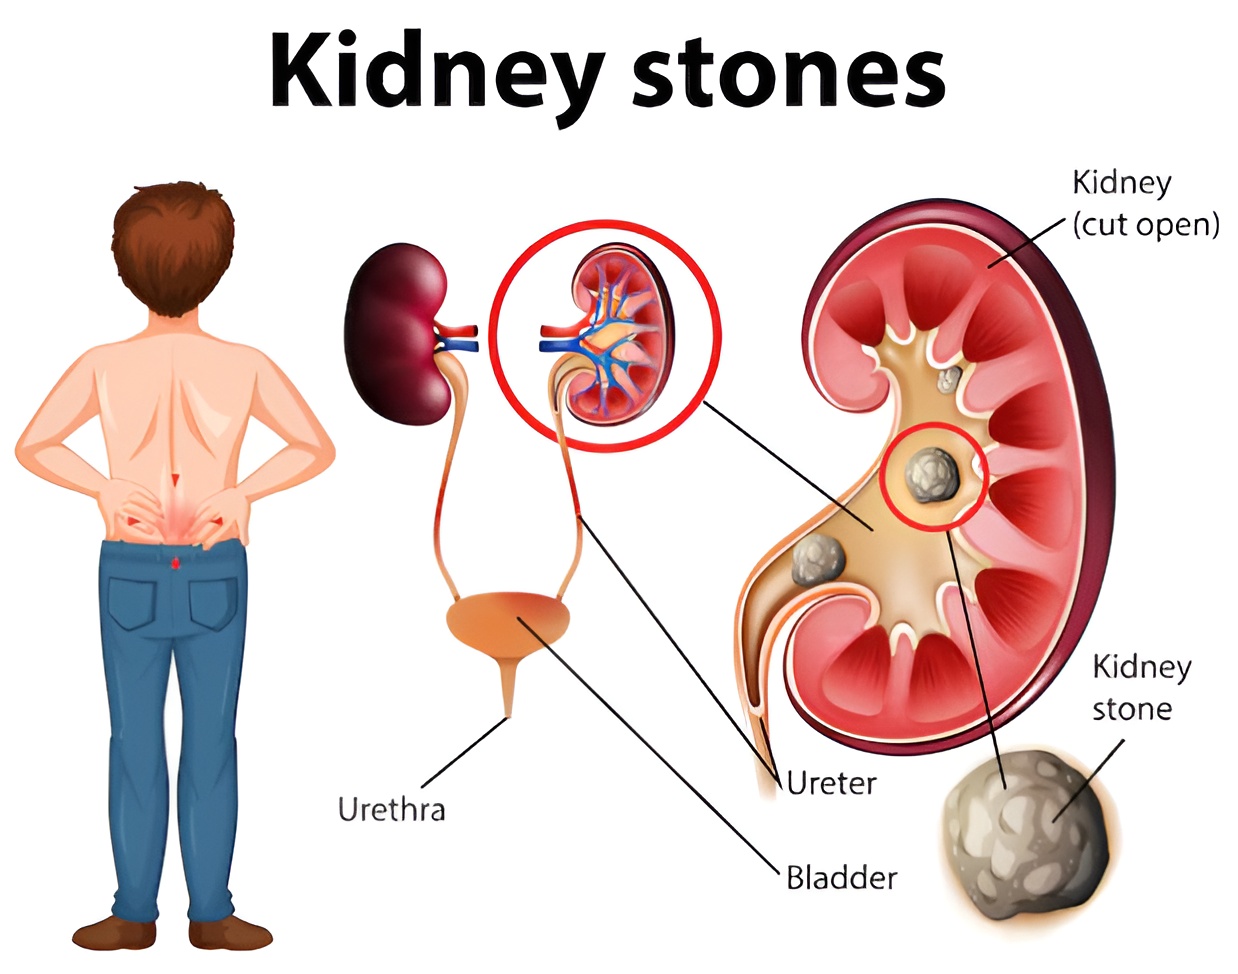 Tips and dietary advice to prevent kidney stones